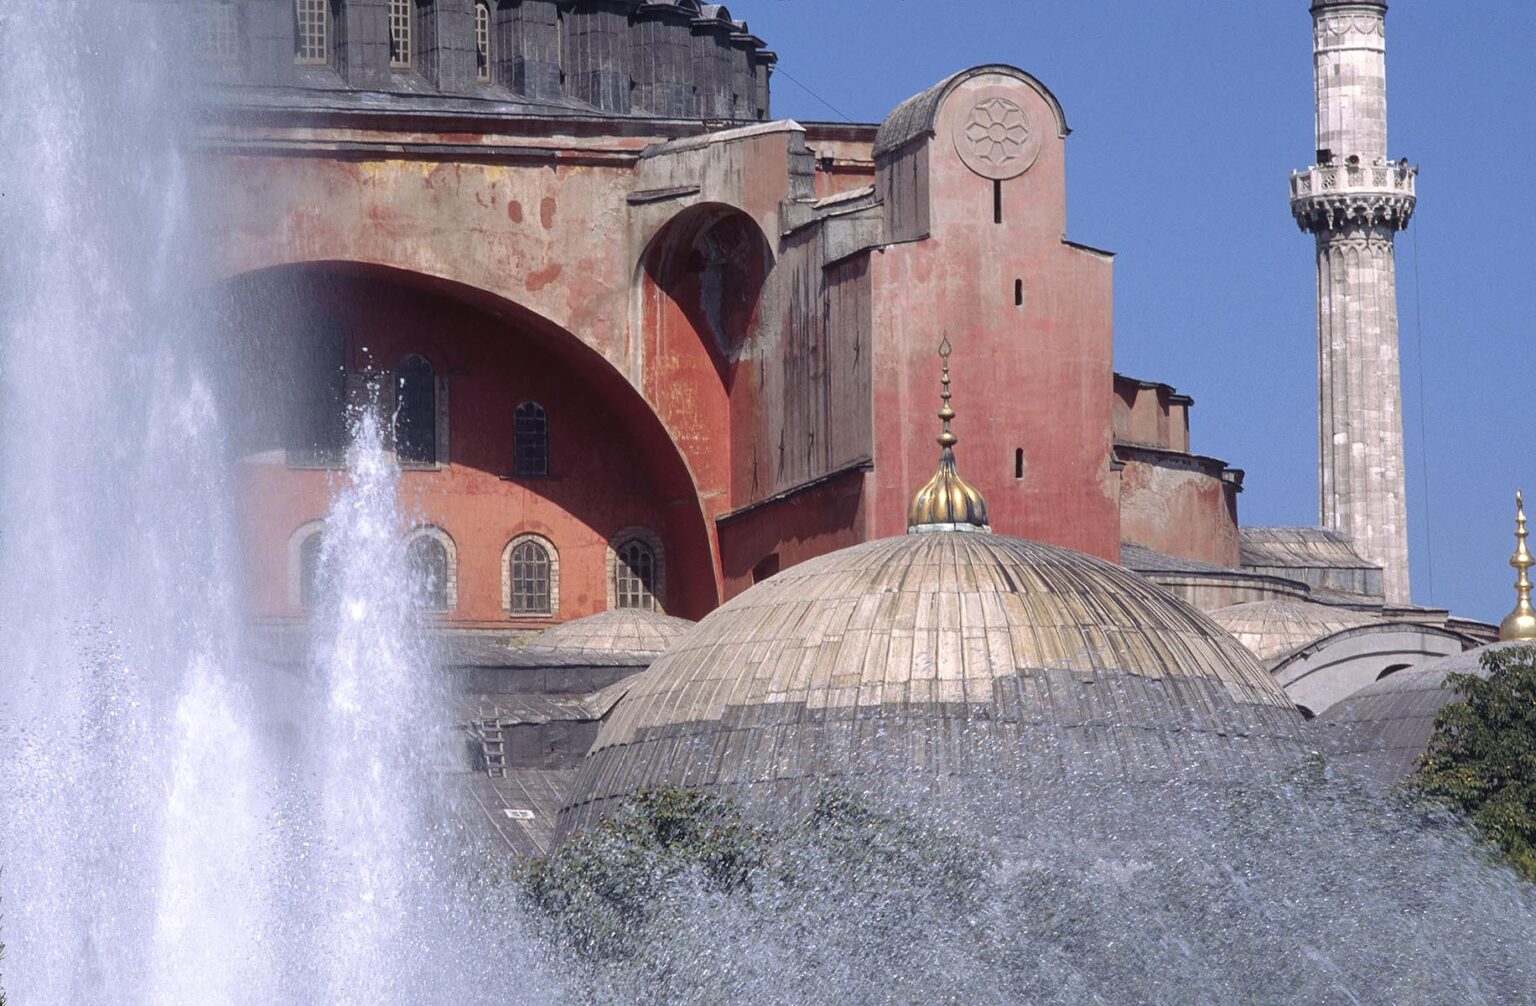 Water fountain and The Ayasofya Camii (St Sophia Cathedral) - Byzantine church originally built in 537 AD, & eventually converted to a Mosque - Istanbul. Turkey